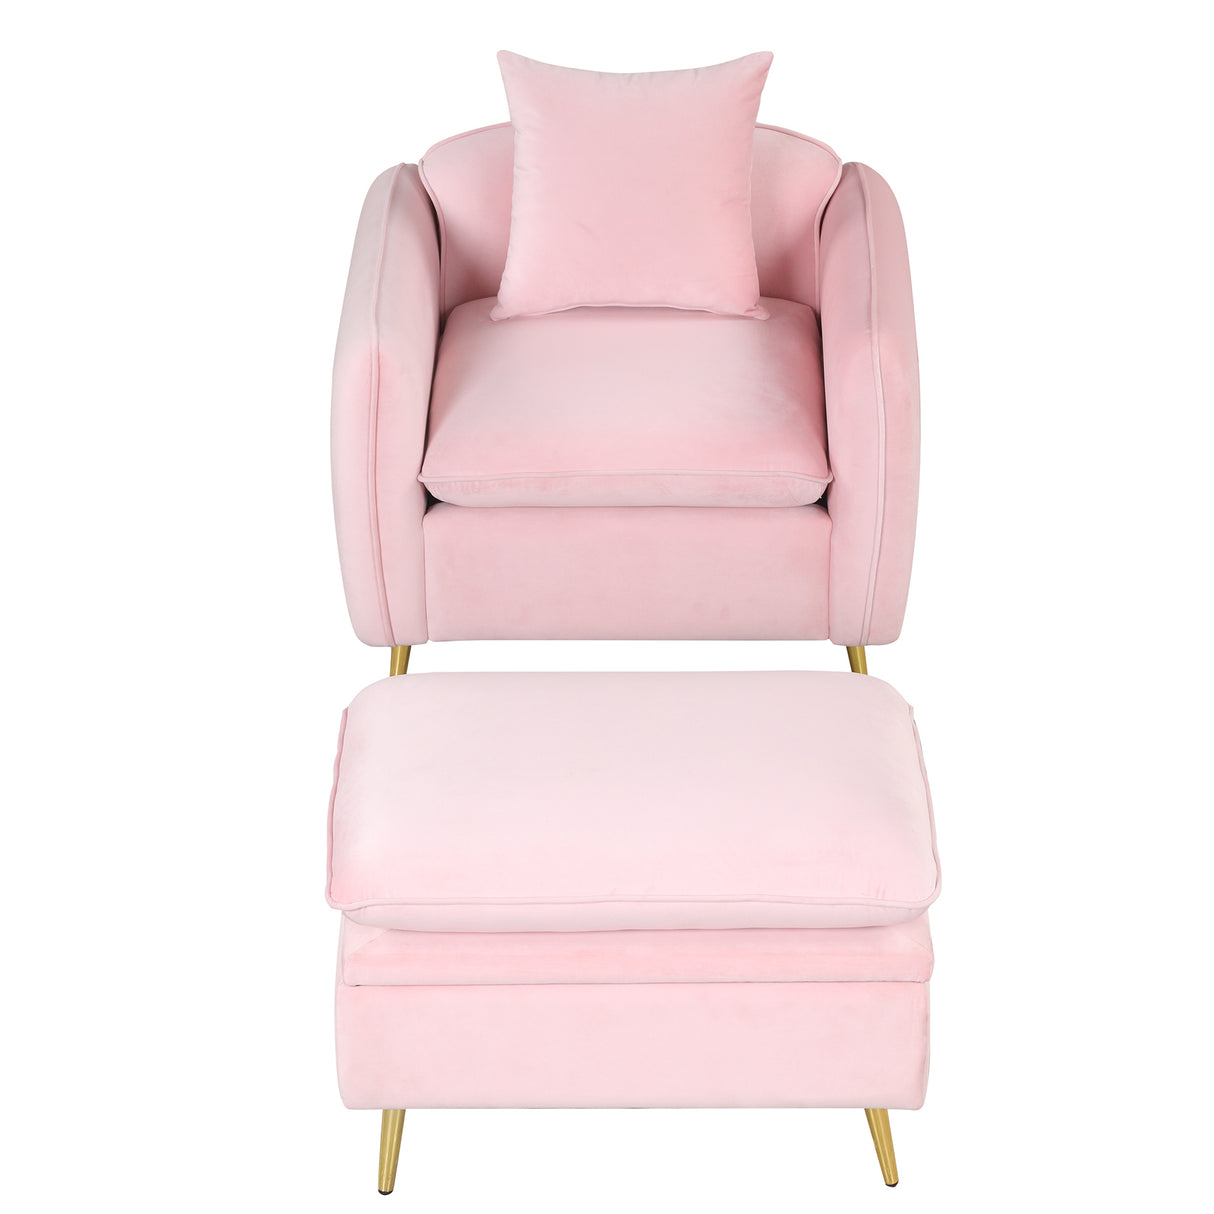 35.2" Modern Accent Chair,Single Sofa Chair with Ottoman Foot Rest and Pillow for Living Room Bedroom Small Spaces Apartment Office,Pink - Home Elegance USA